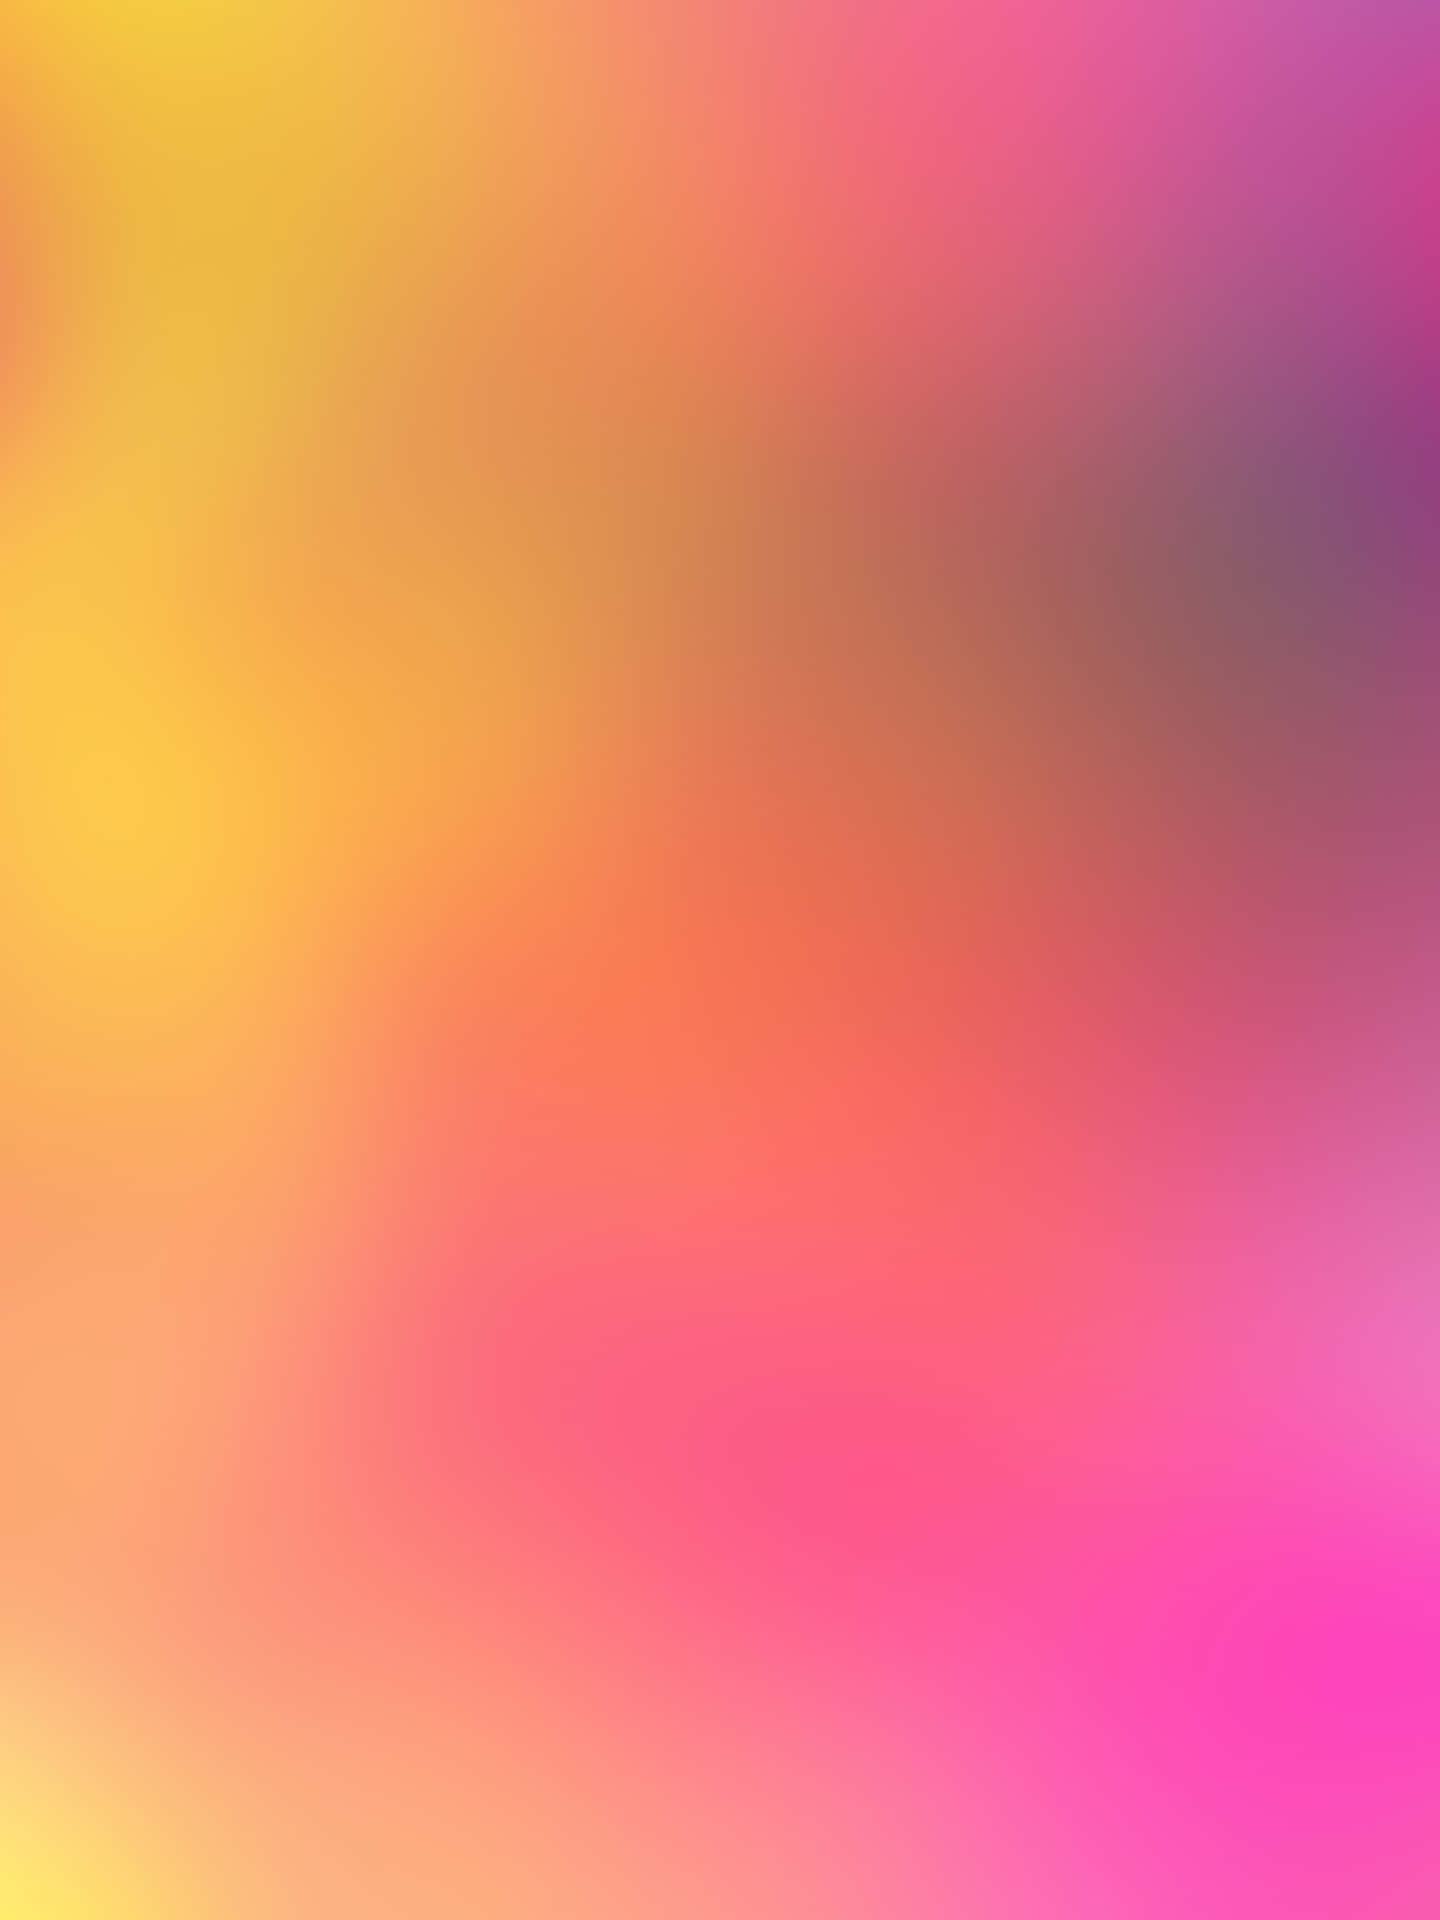 A Colorful Abstract Background With A Yellow, Pink, And Blue Color